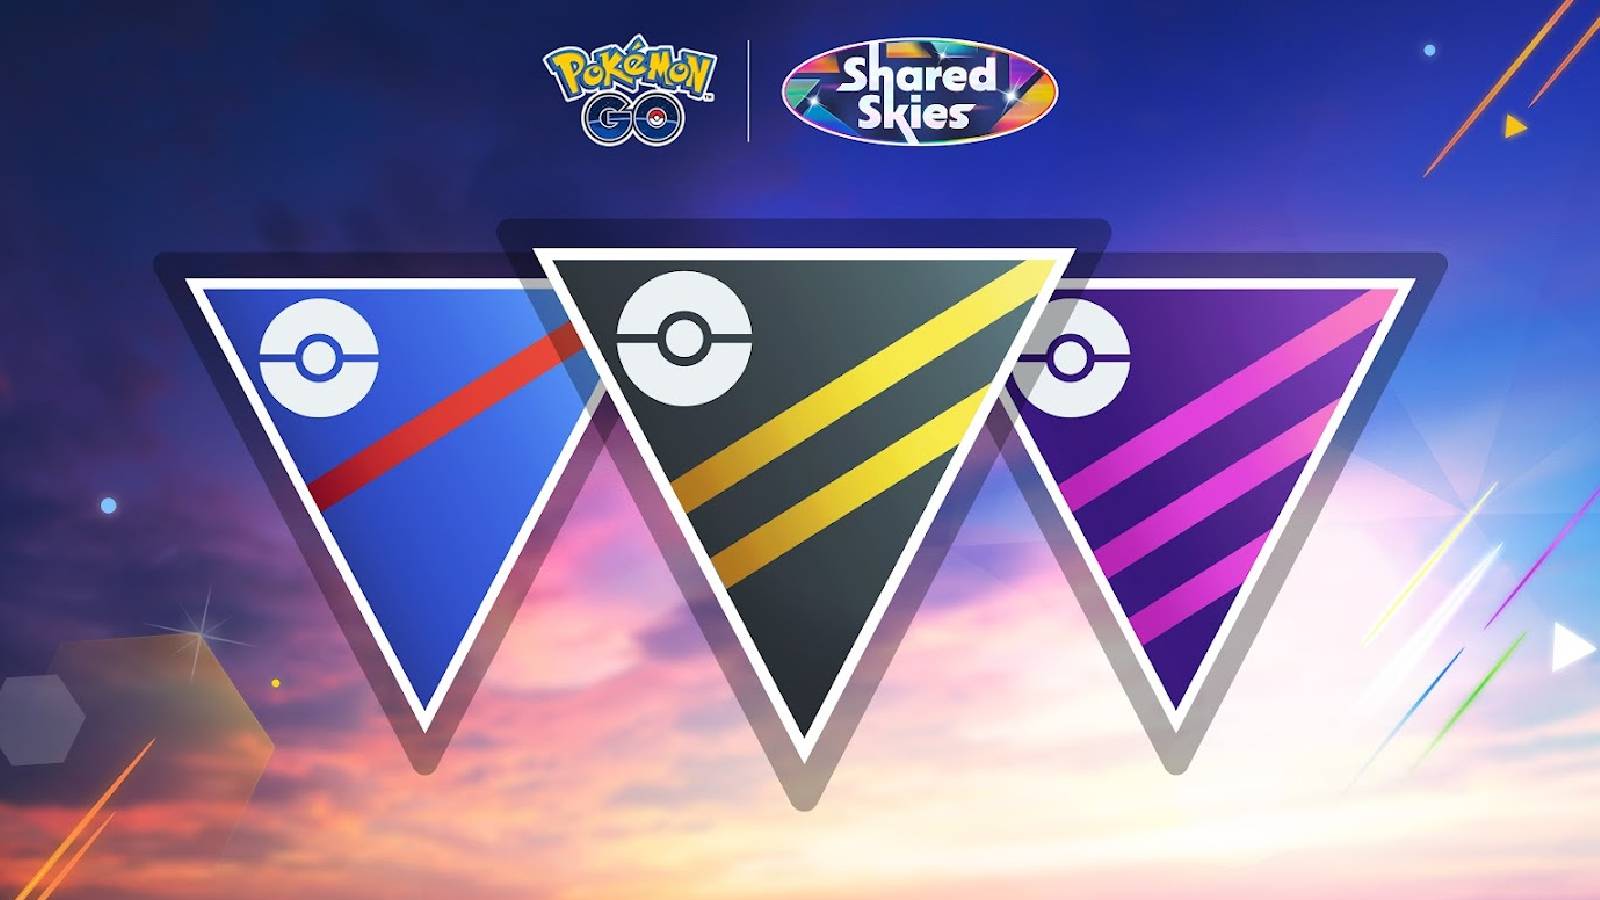 Ket art for Pokemon Go shows the logo for the different Go Battle Leagues as well as text reading Pokemon Go and Shared Skies